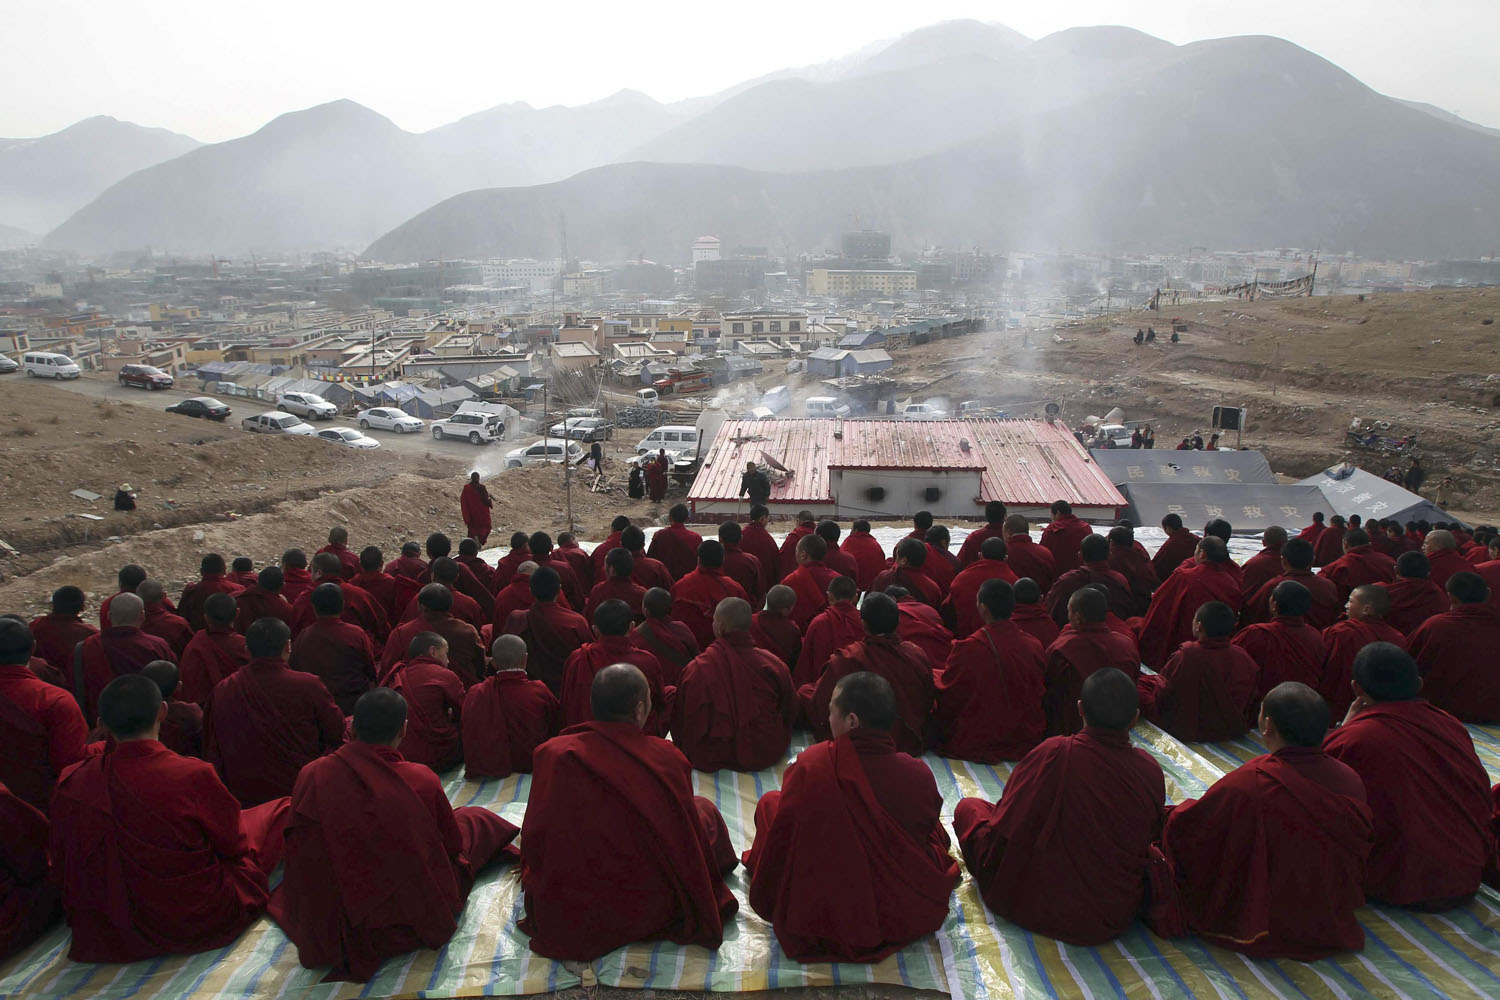 April 14, 2013. Tibetan Buddhist monks attend a mass prayer in memorial for victims of the earthquake which hit Yushu county three years ago, in Yushu, Qinghai province.